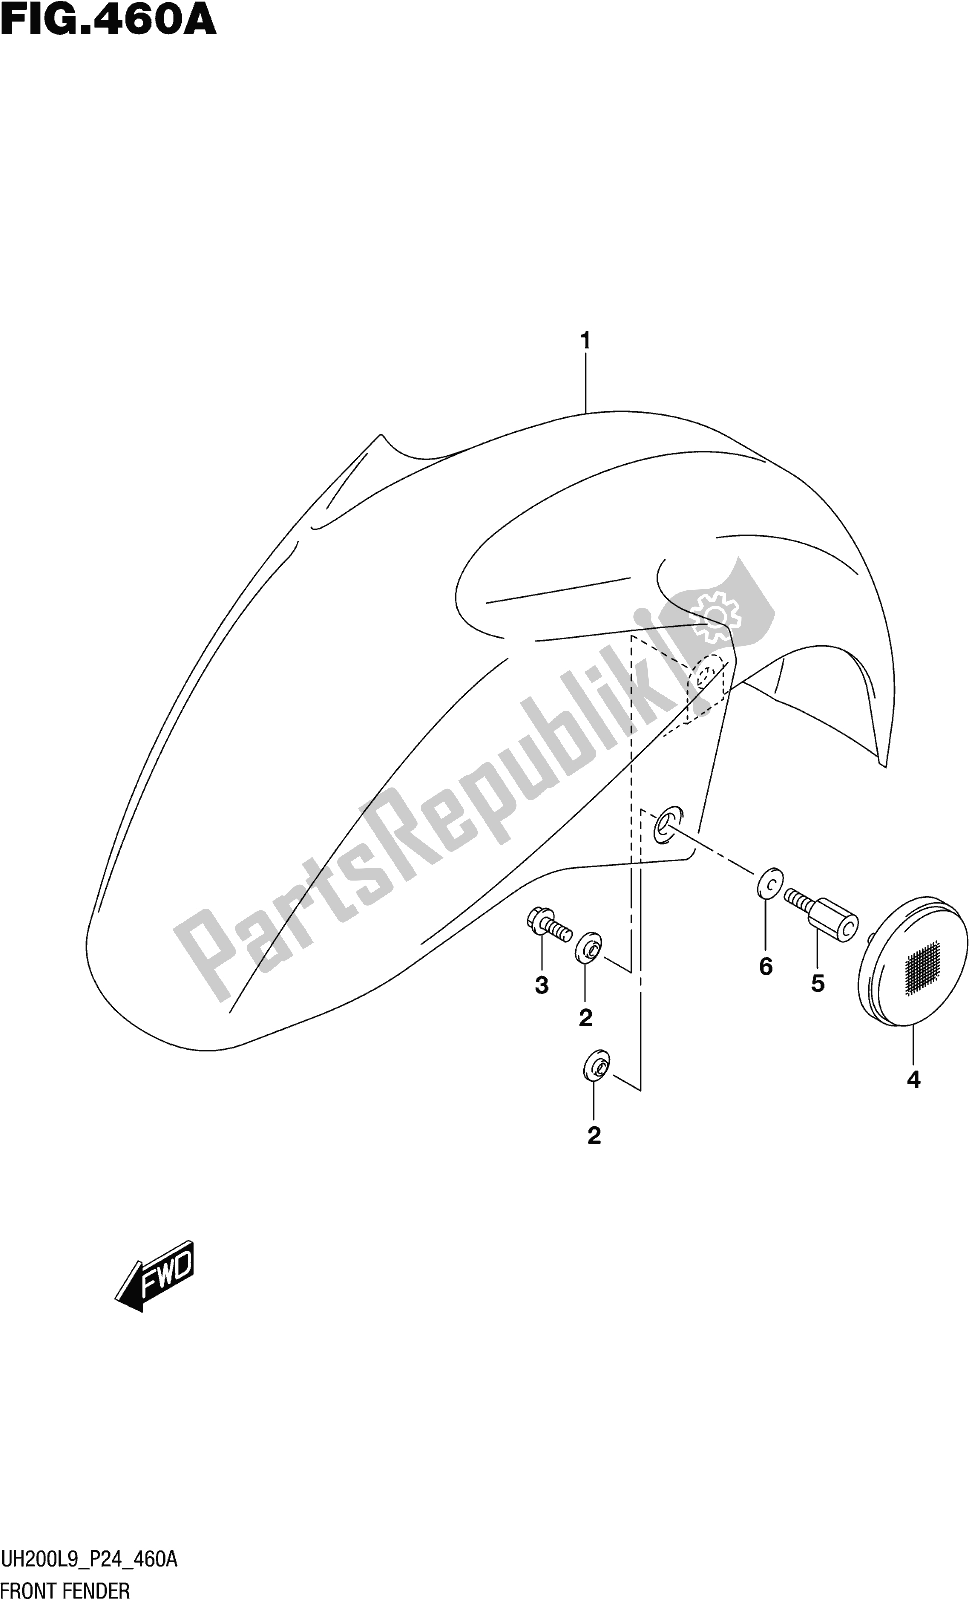 All parts for the Fig. 460a Front Fender of the Suzuki UH 200 2019